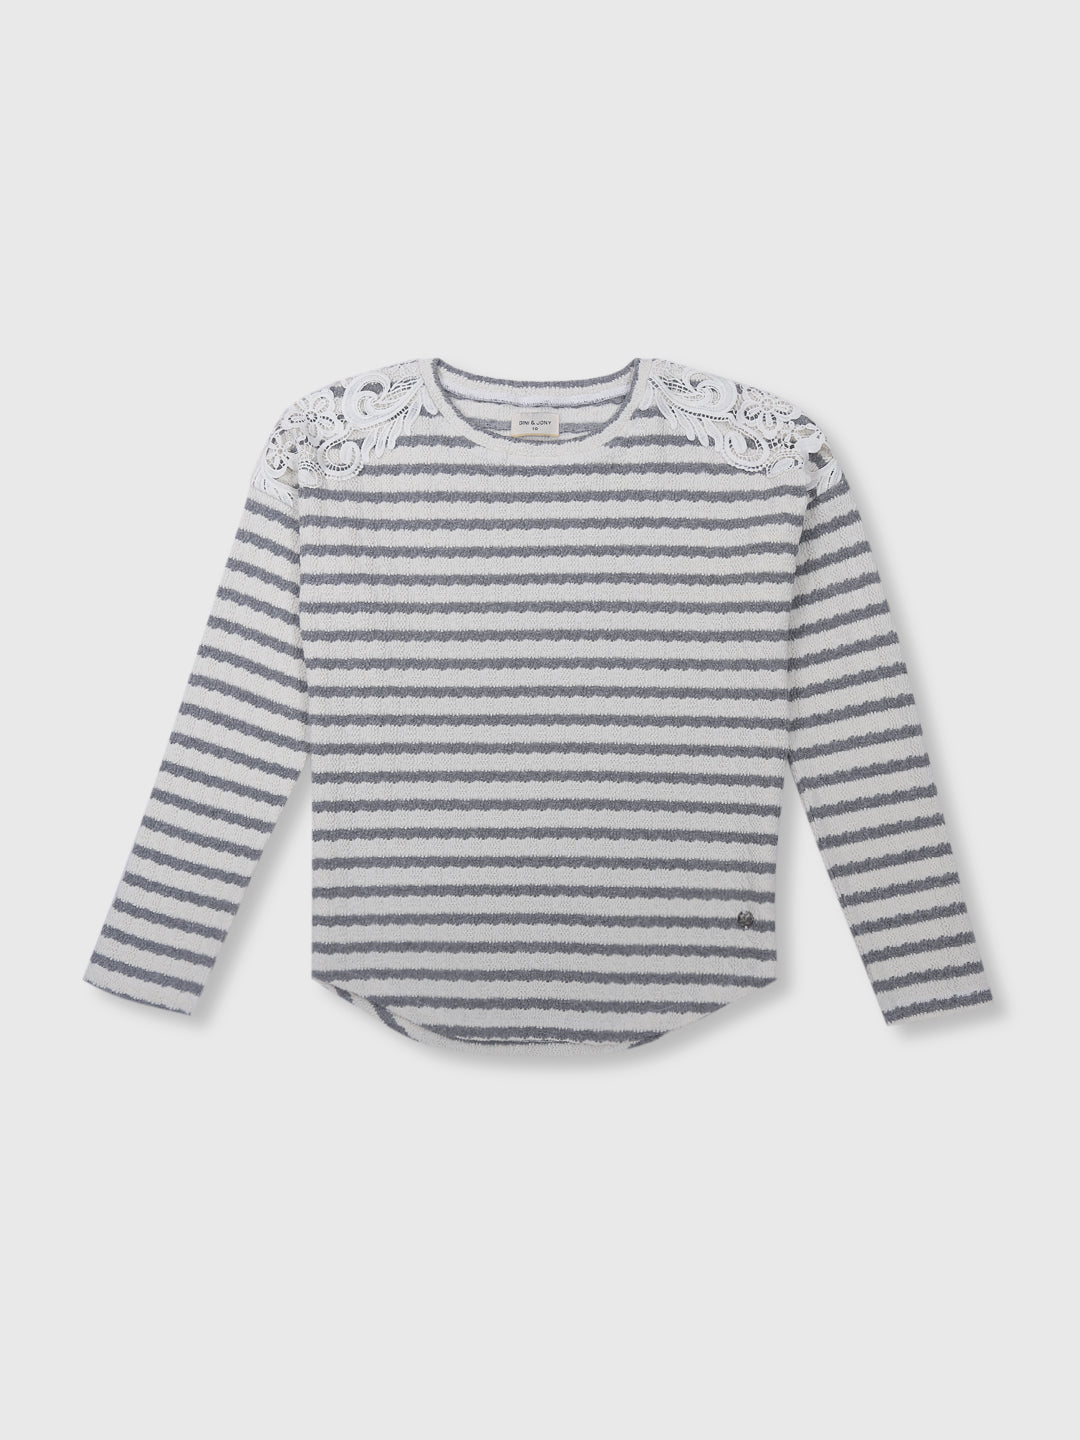 Girls Grey Striped Woven Knits Top